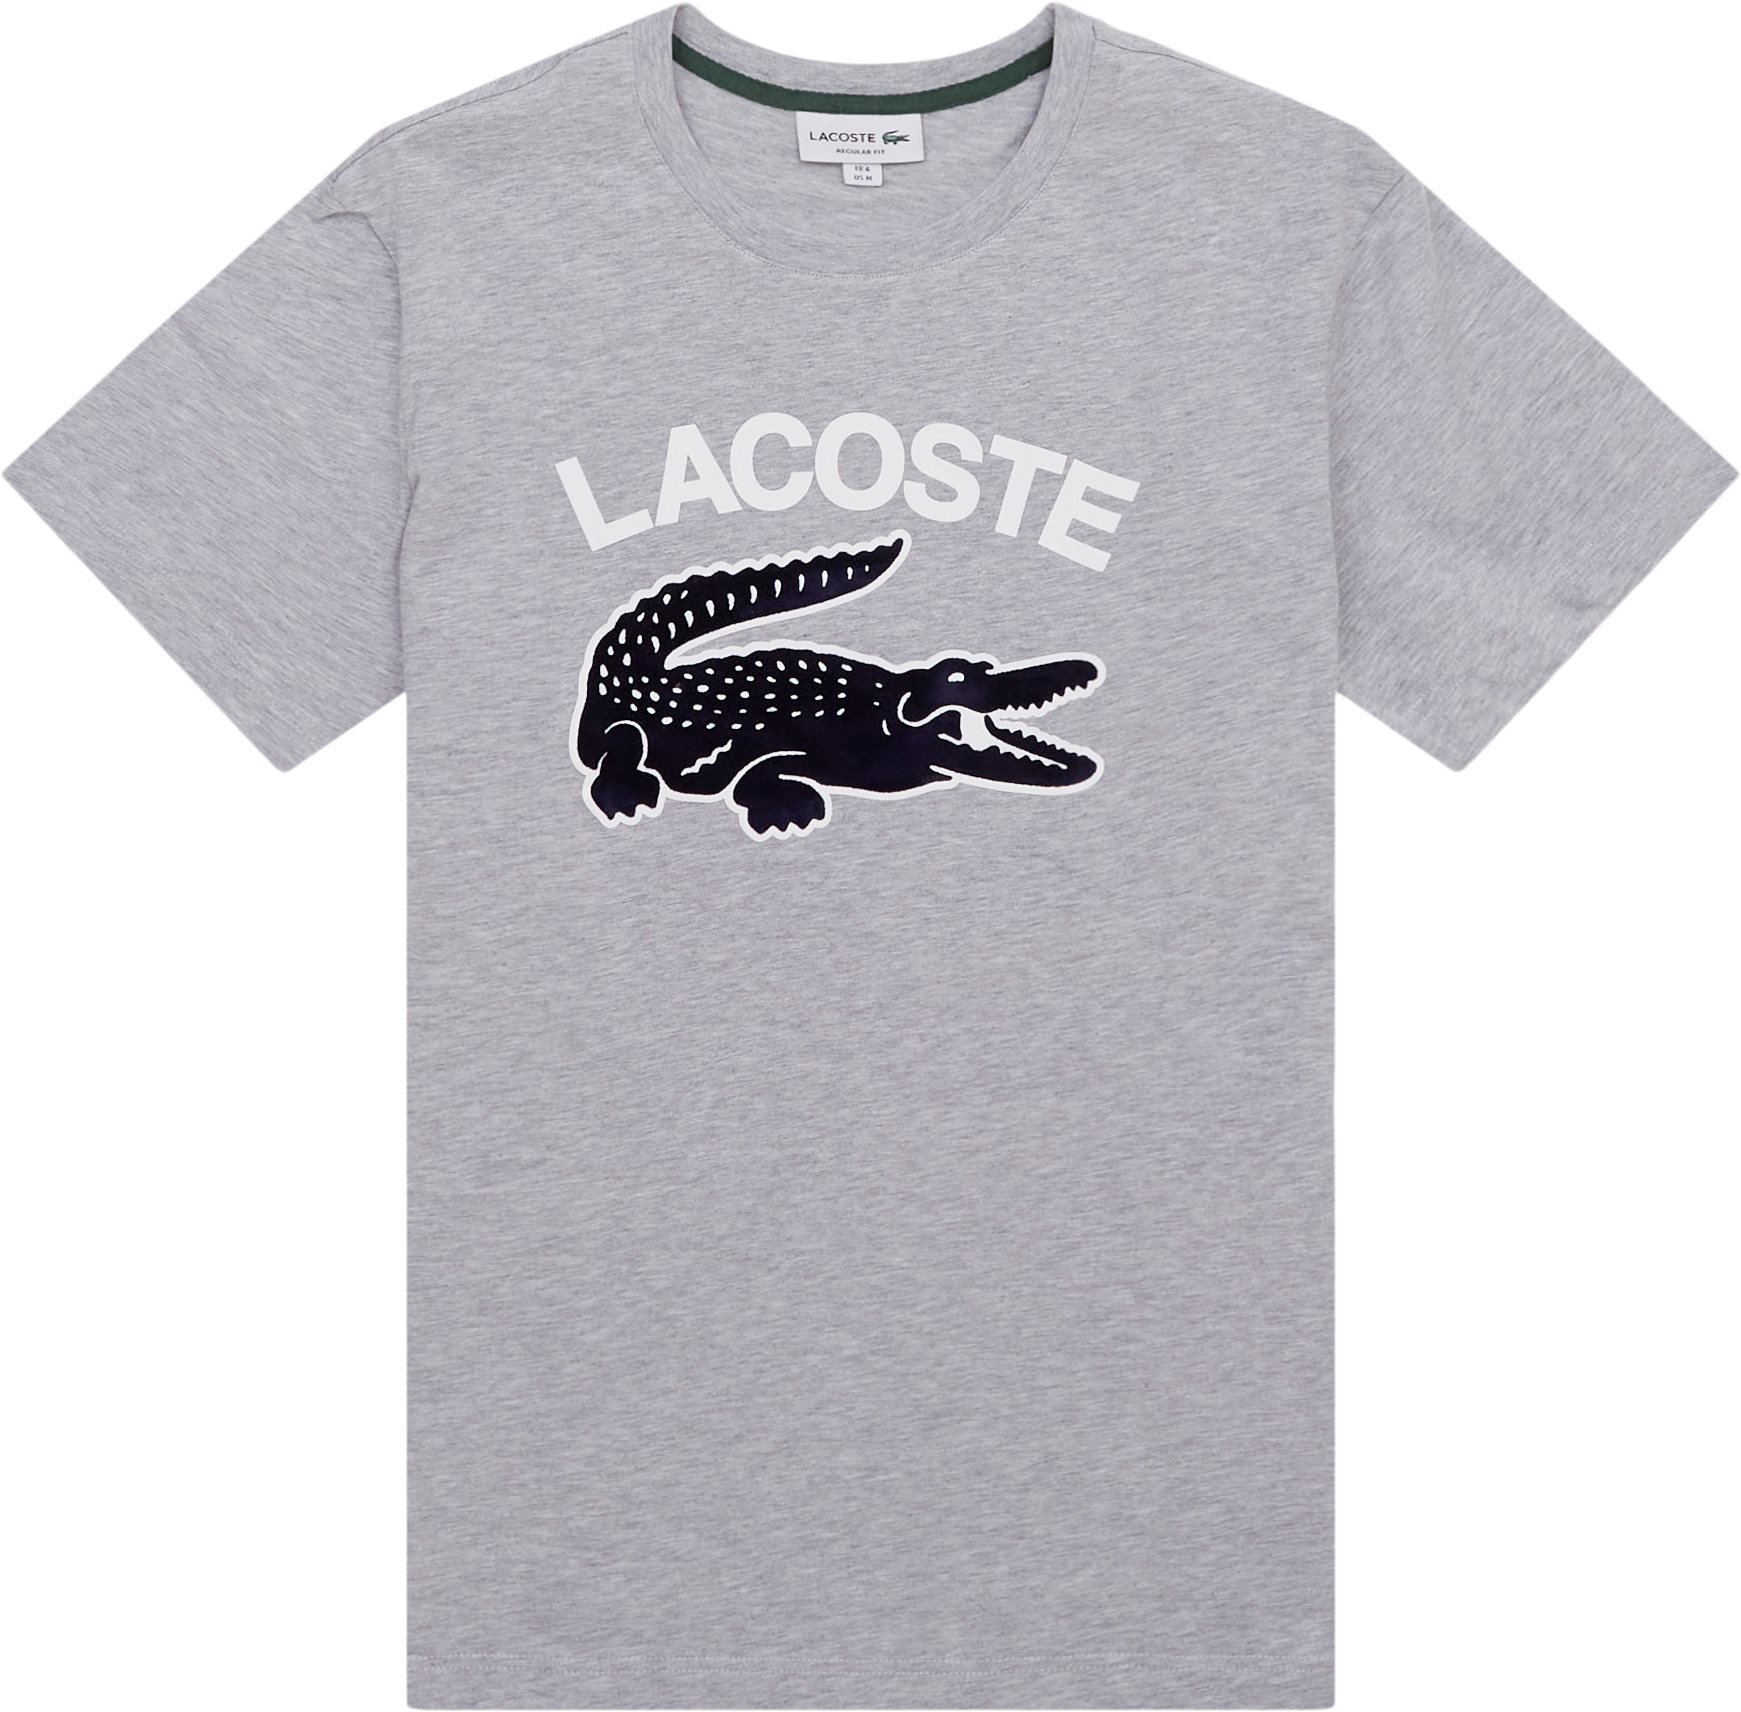 Lacoste T-shirts TH9681 Grey